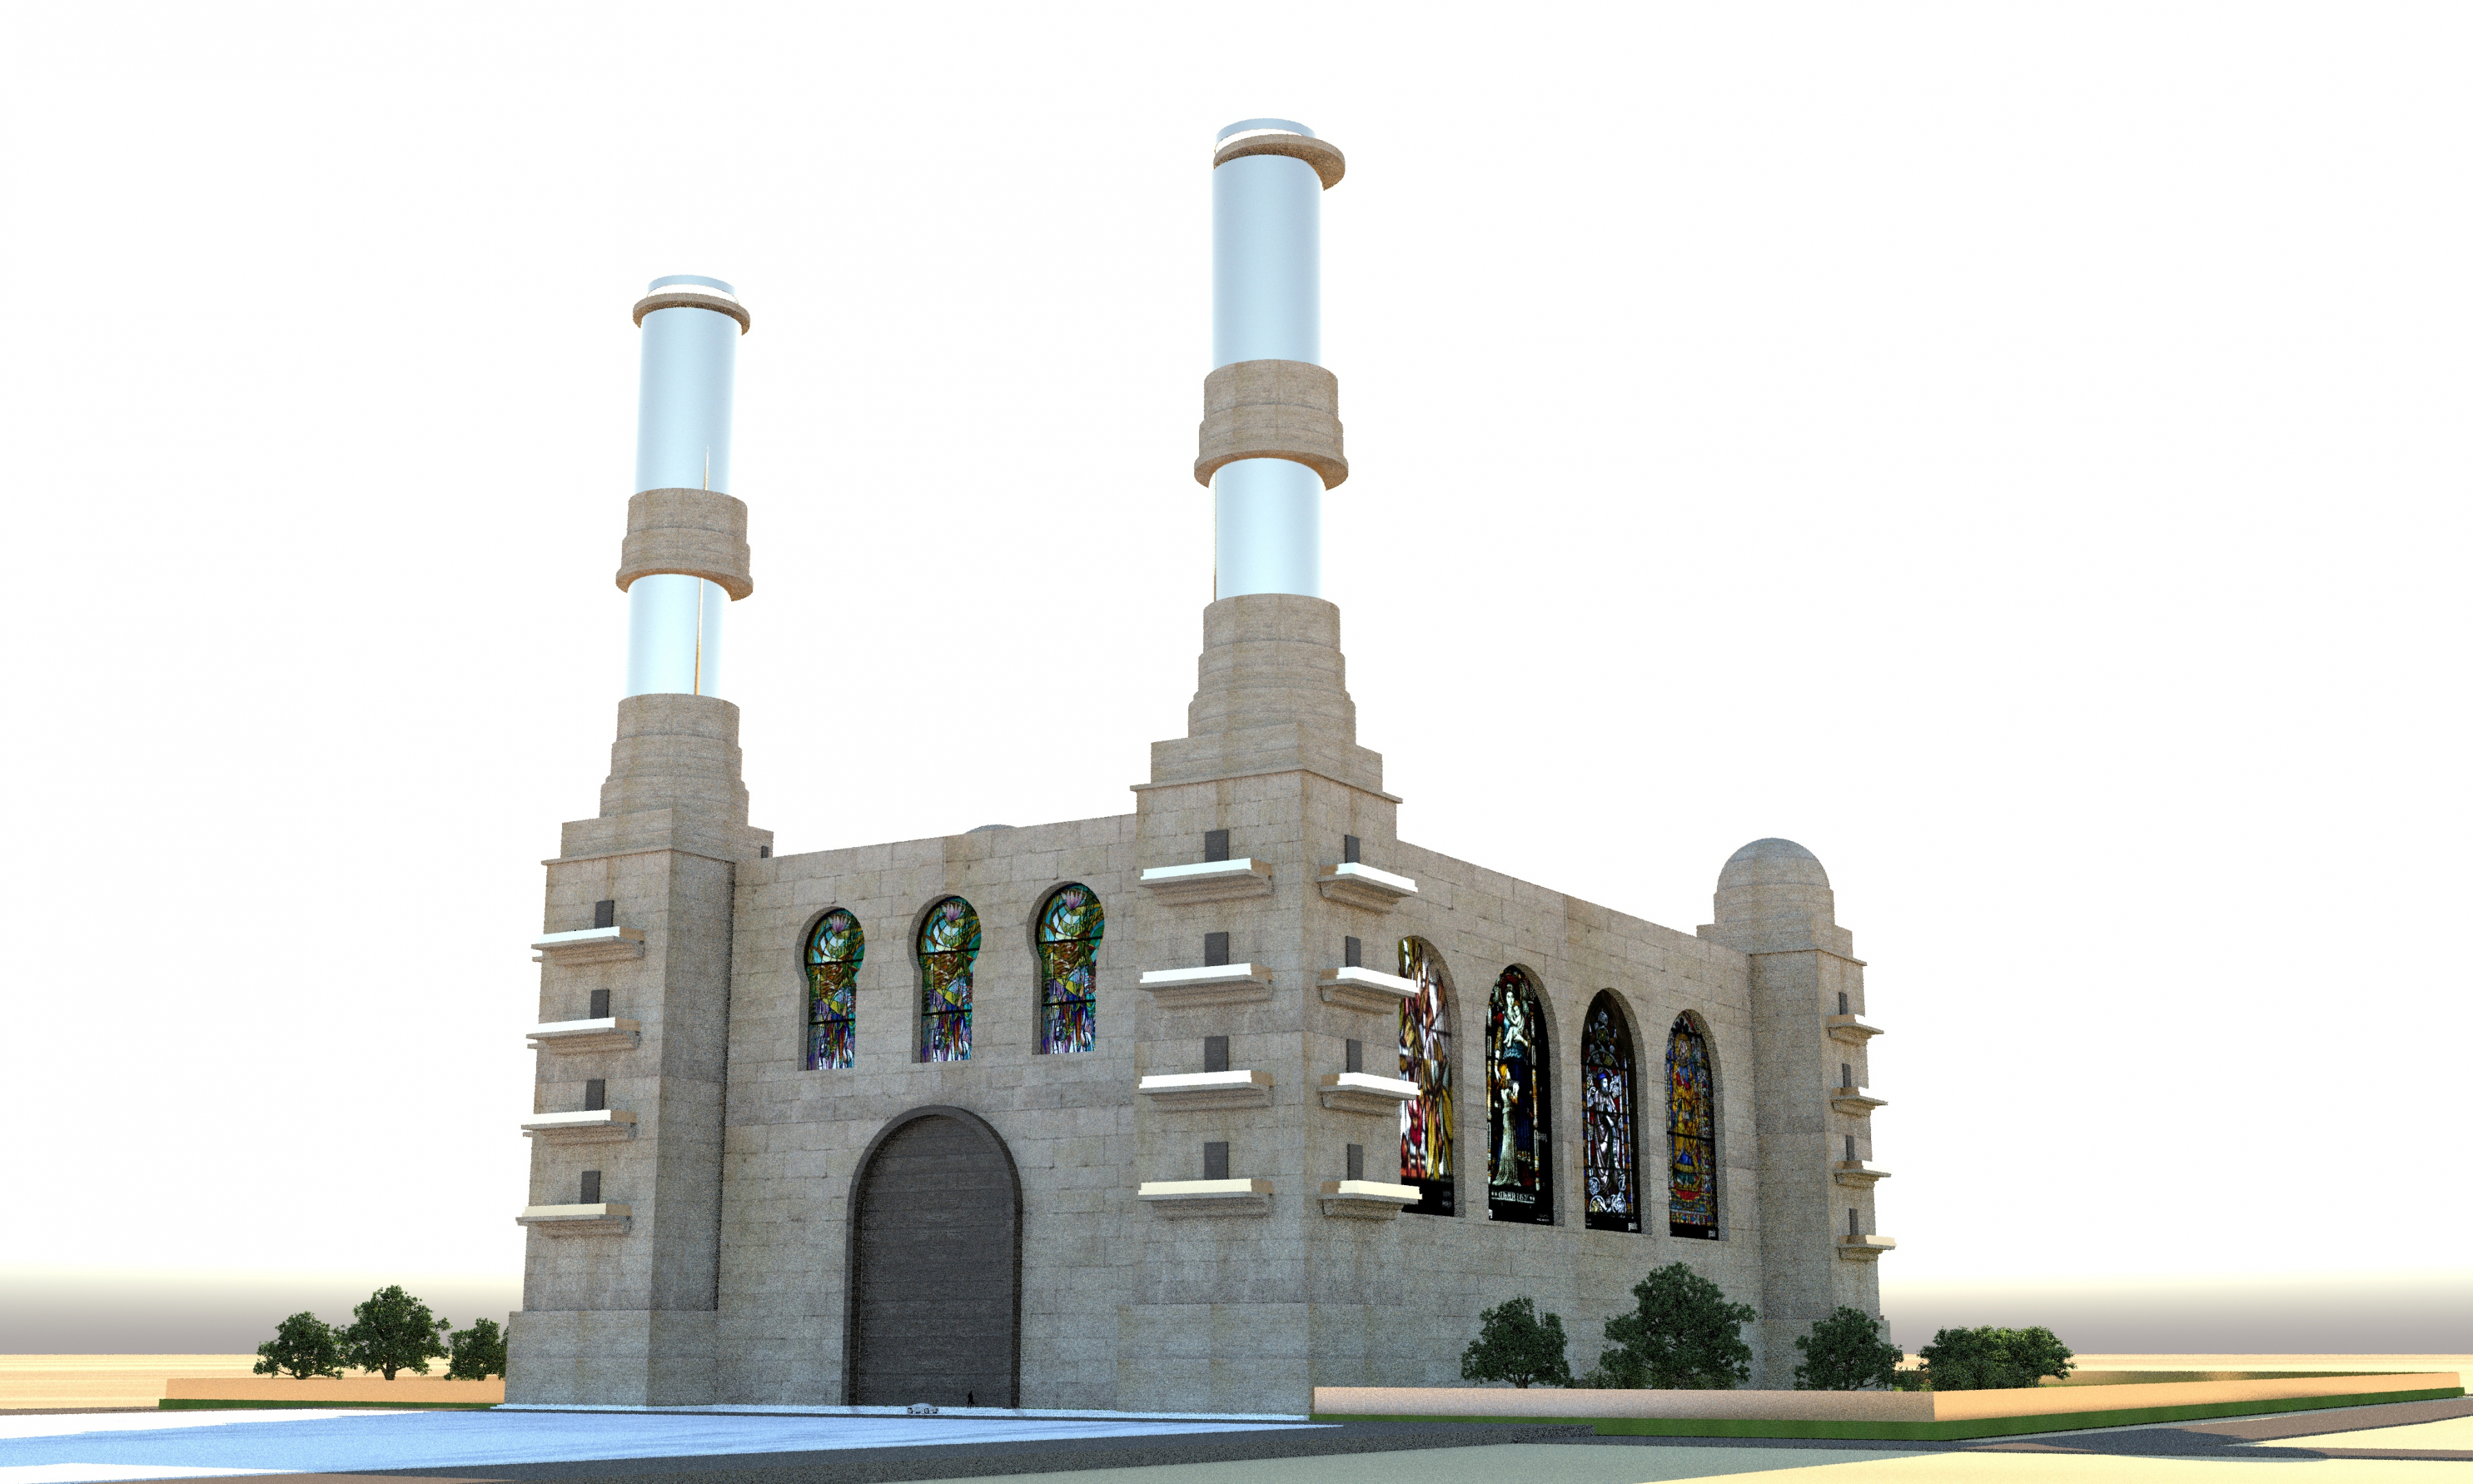 Fictional cathedral with golden towers in AutoCAD vray 3.0 image